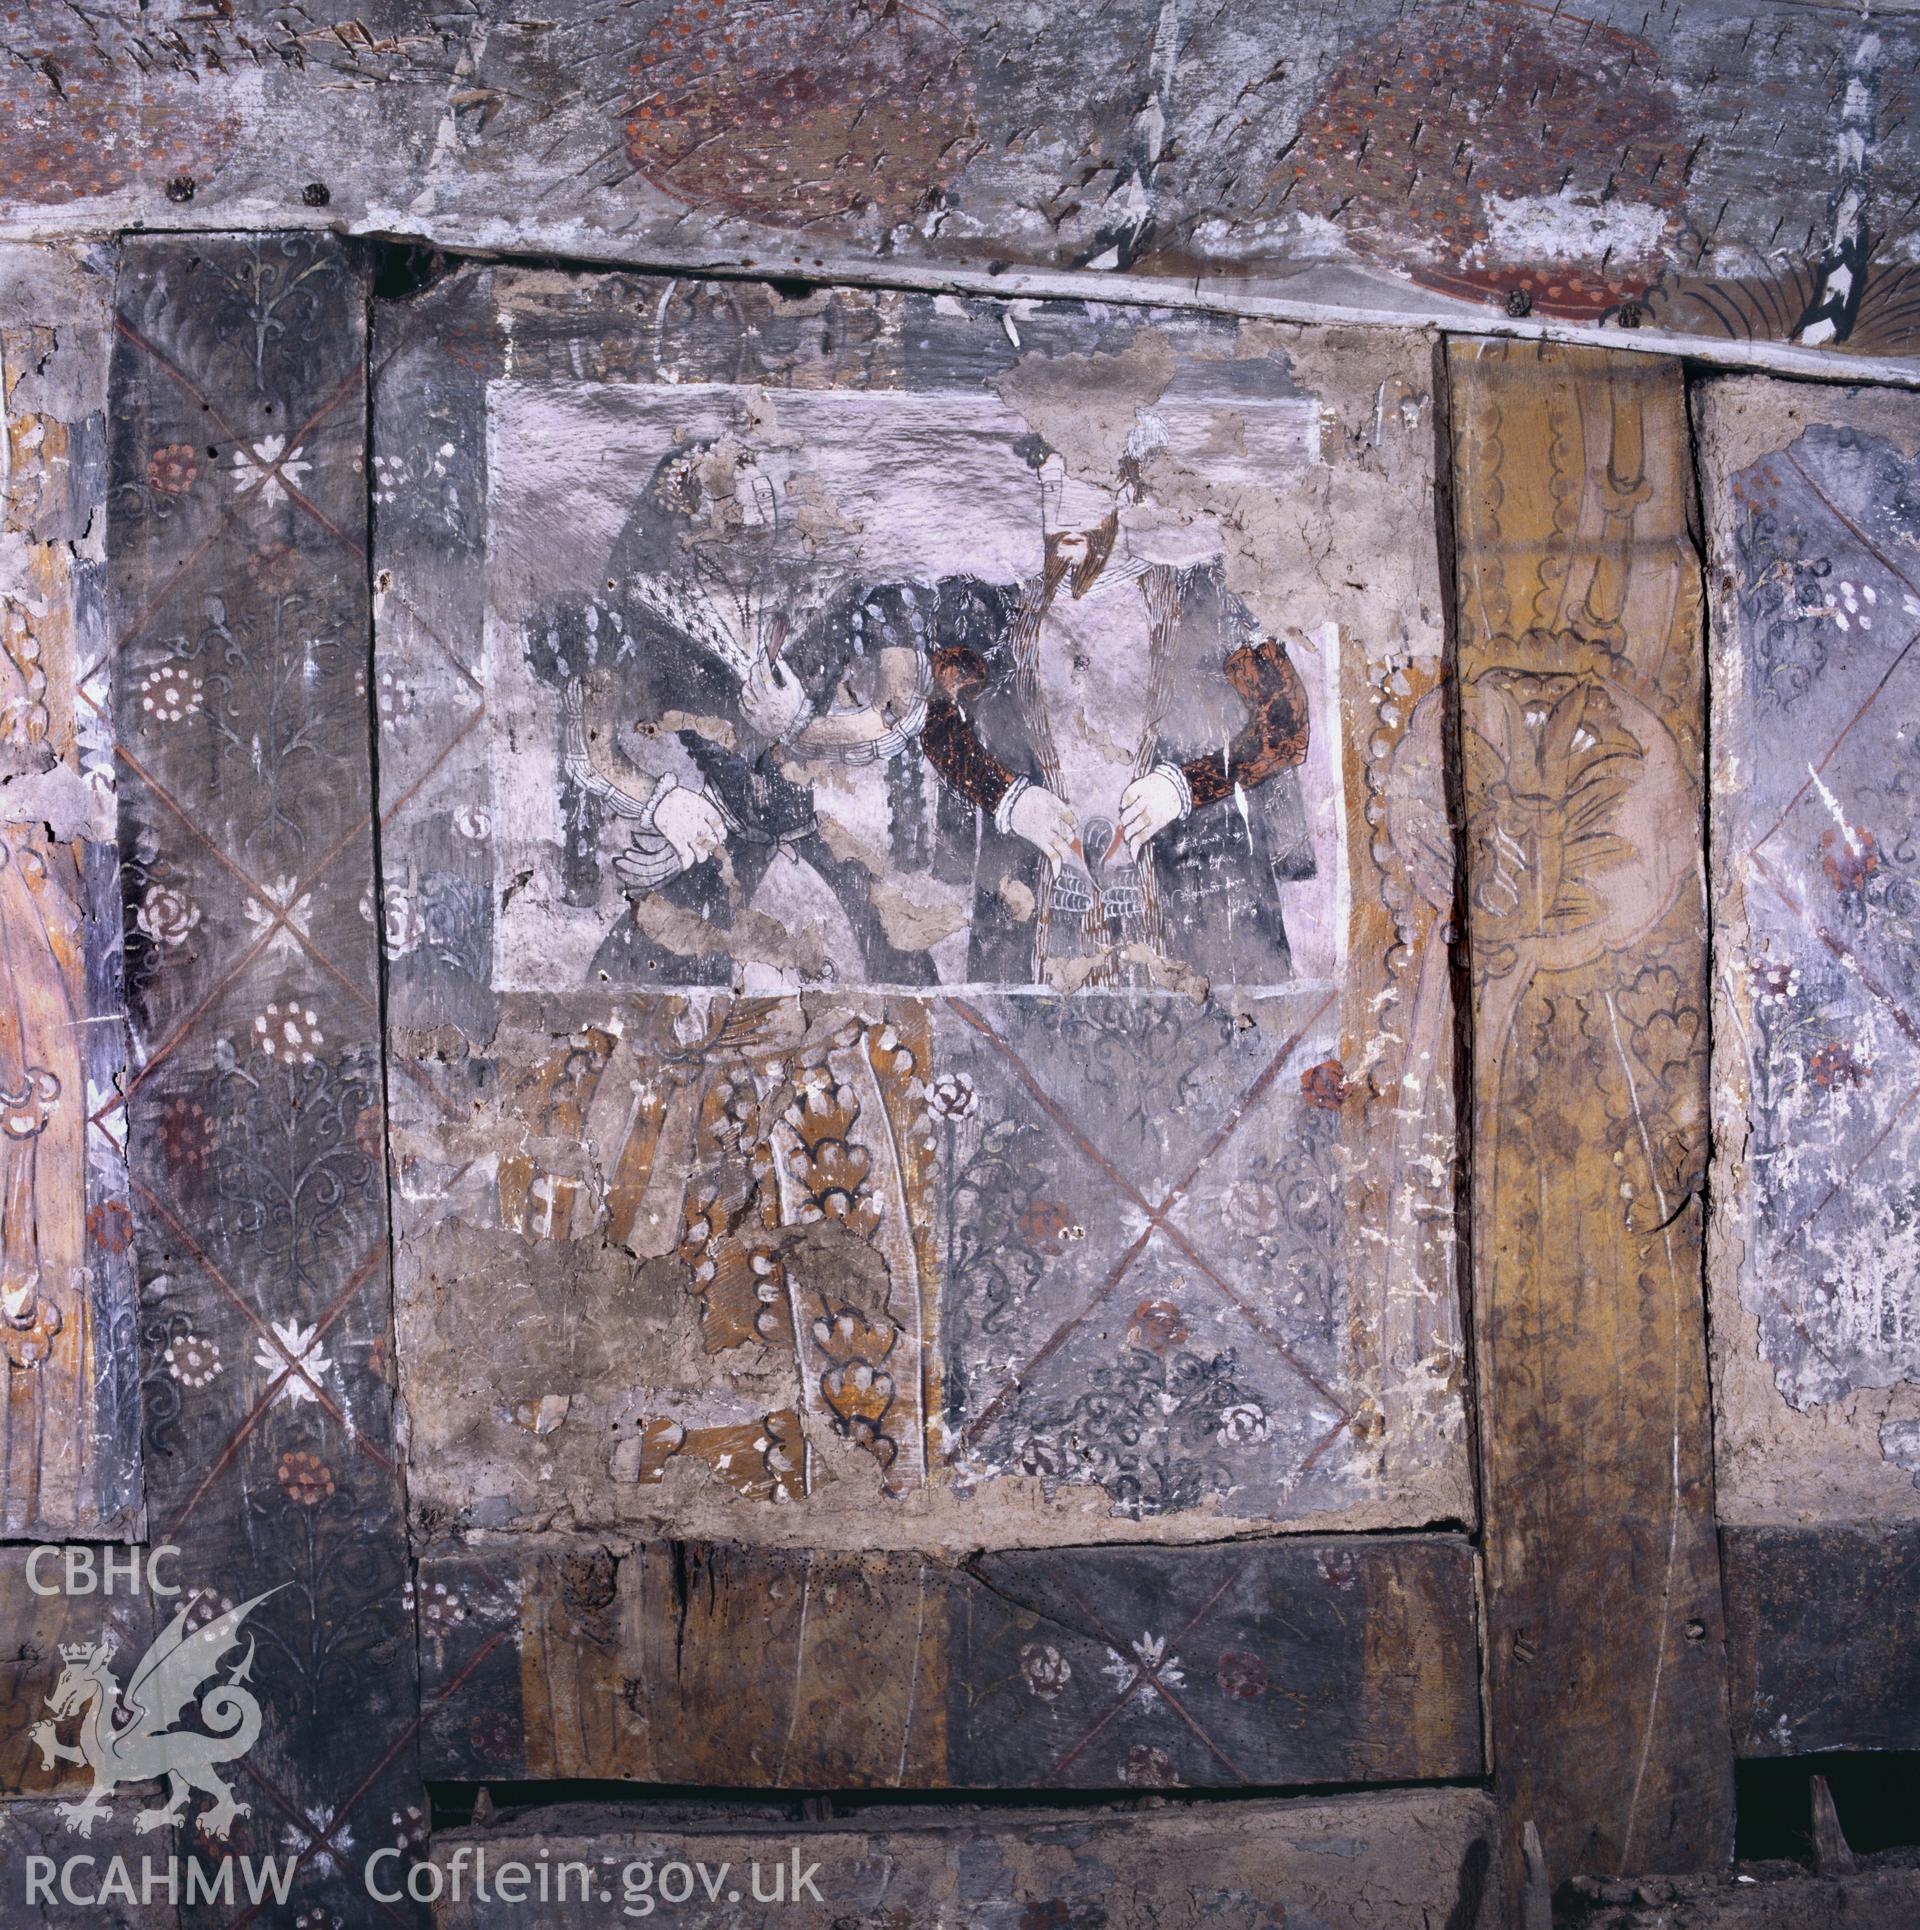 RCAHMW colour transparency showing wallpainting at Althrey Hall, taken by Iain Wright, 2003